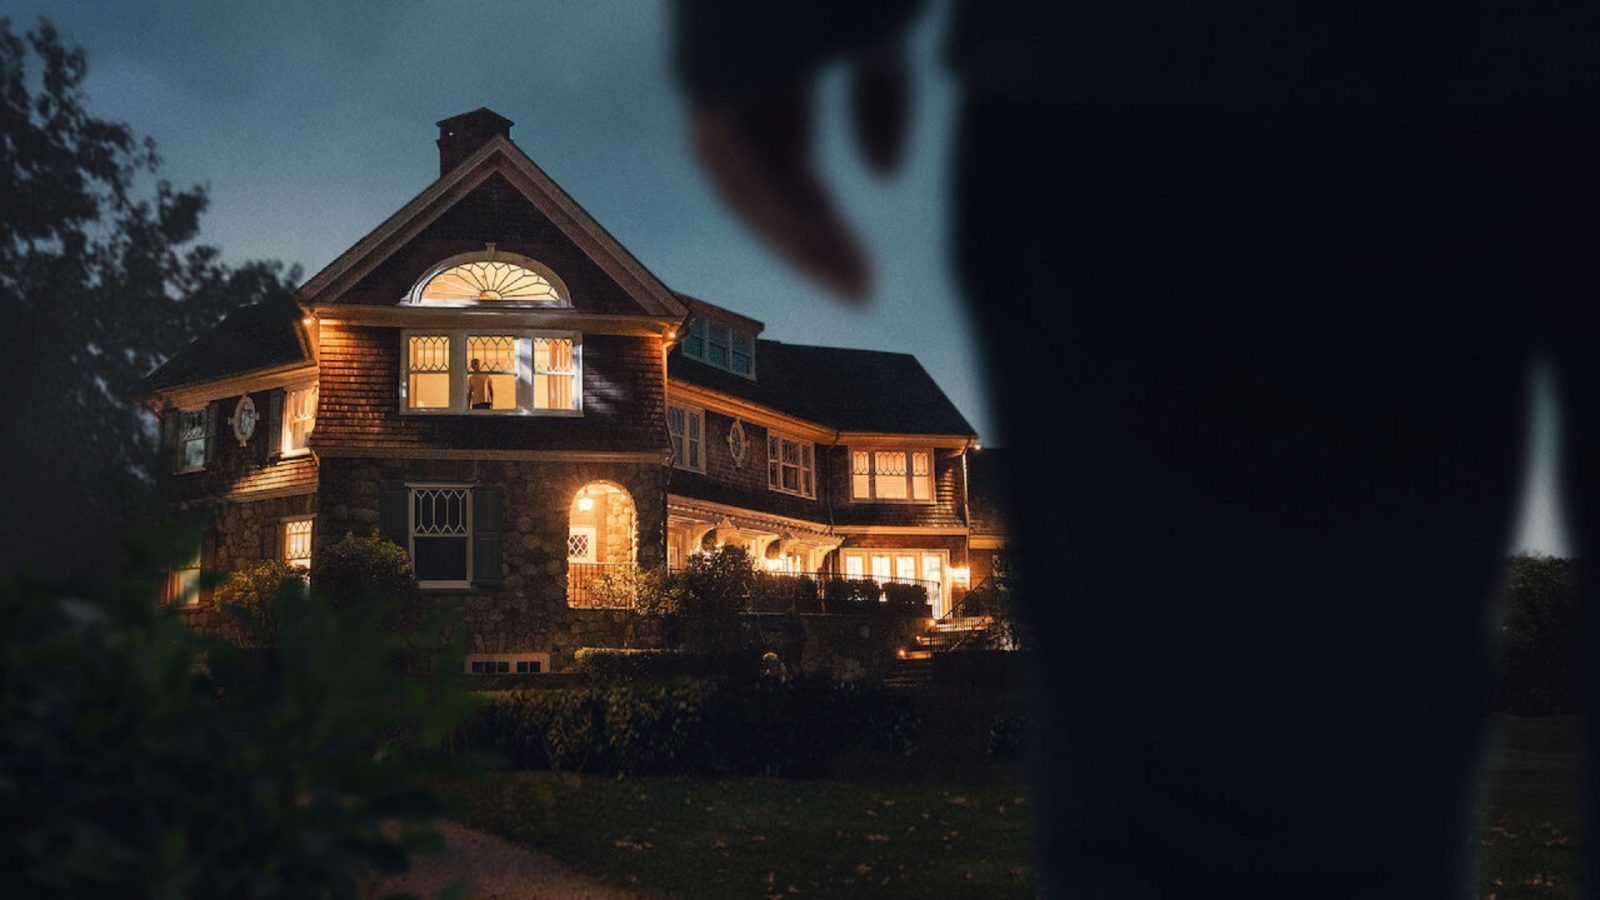 Netflix Filmed The Watcher In NY! Want To See the Series House?